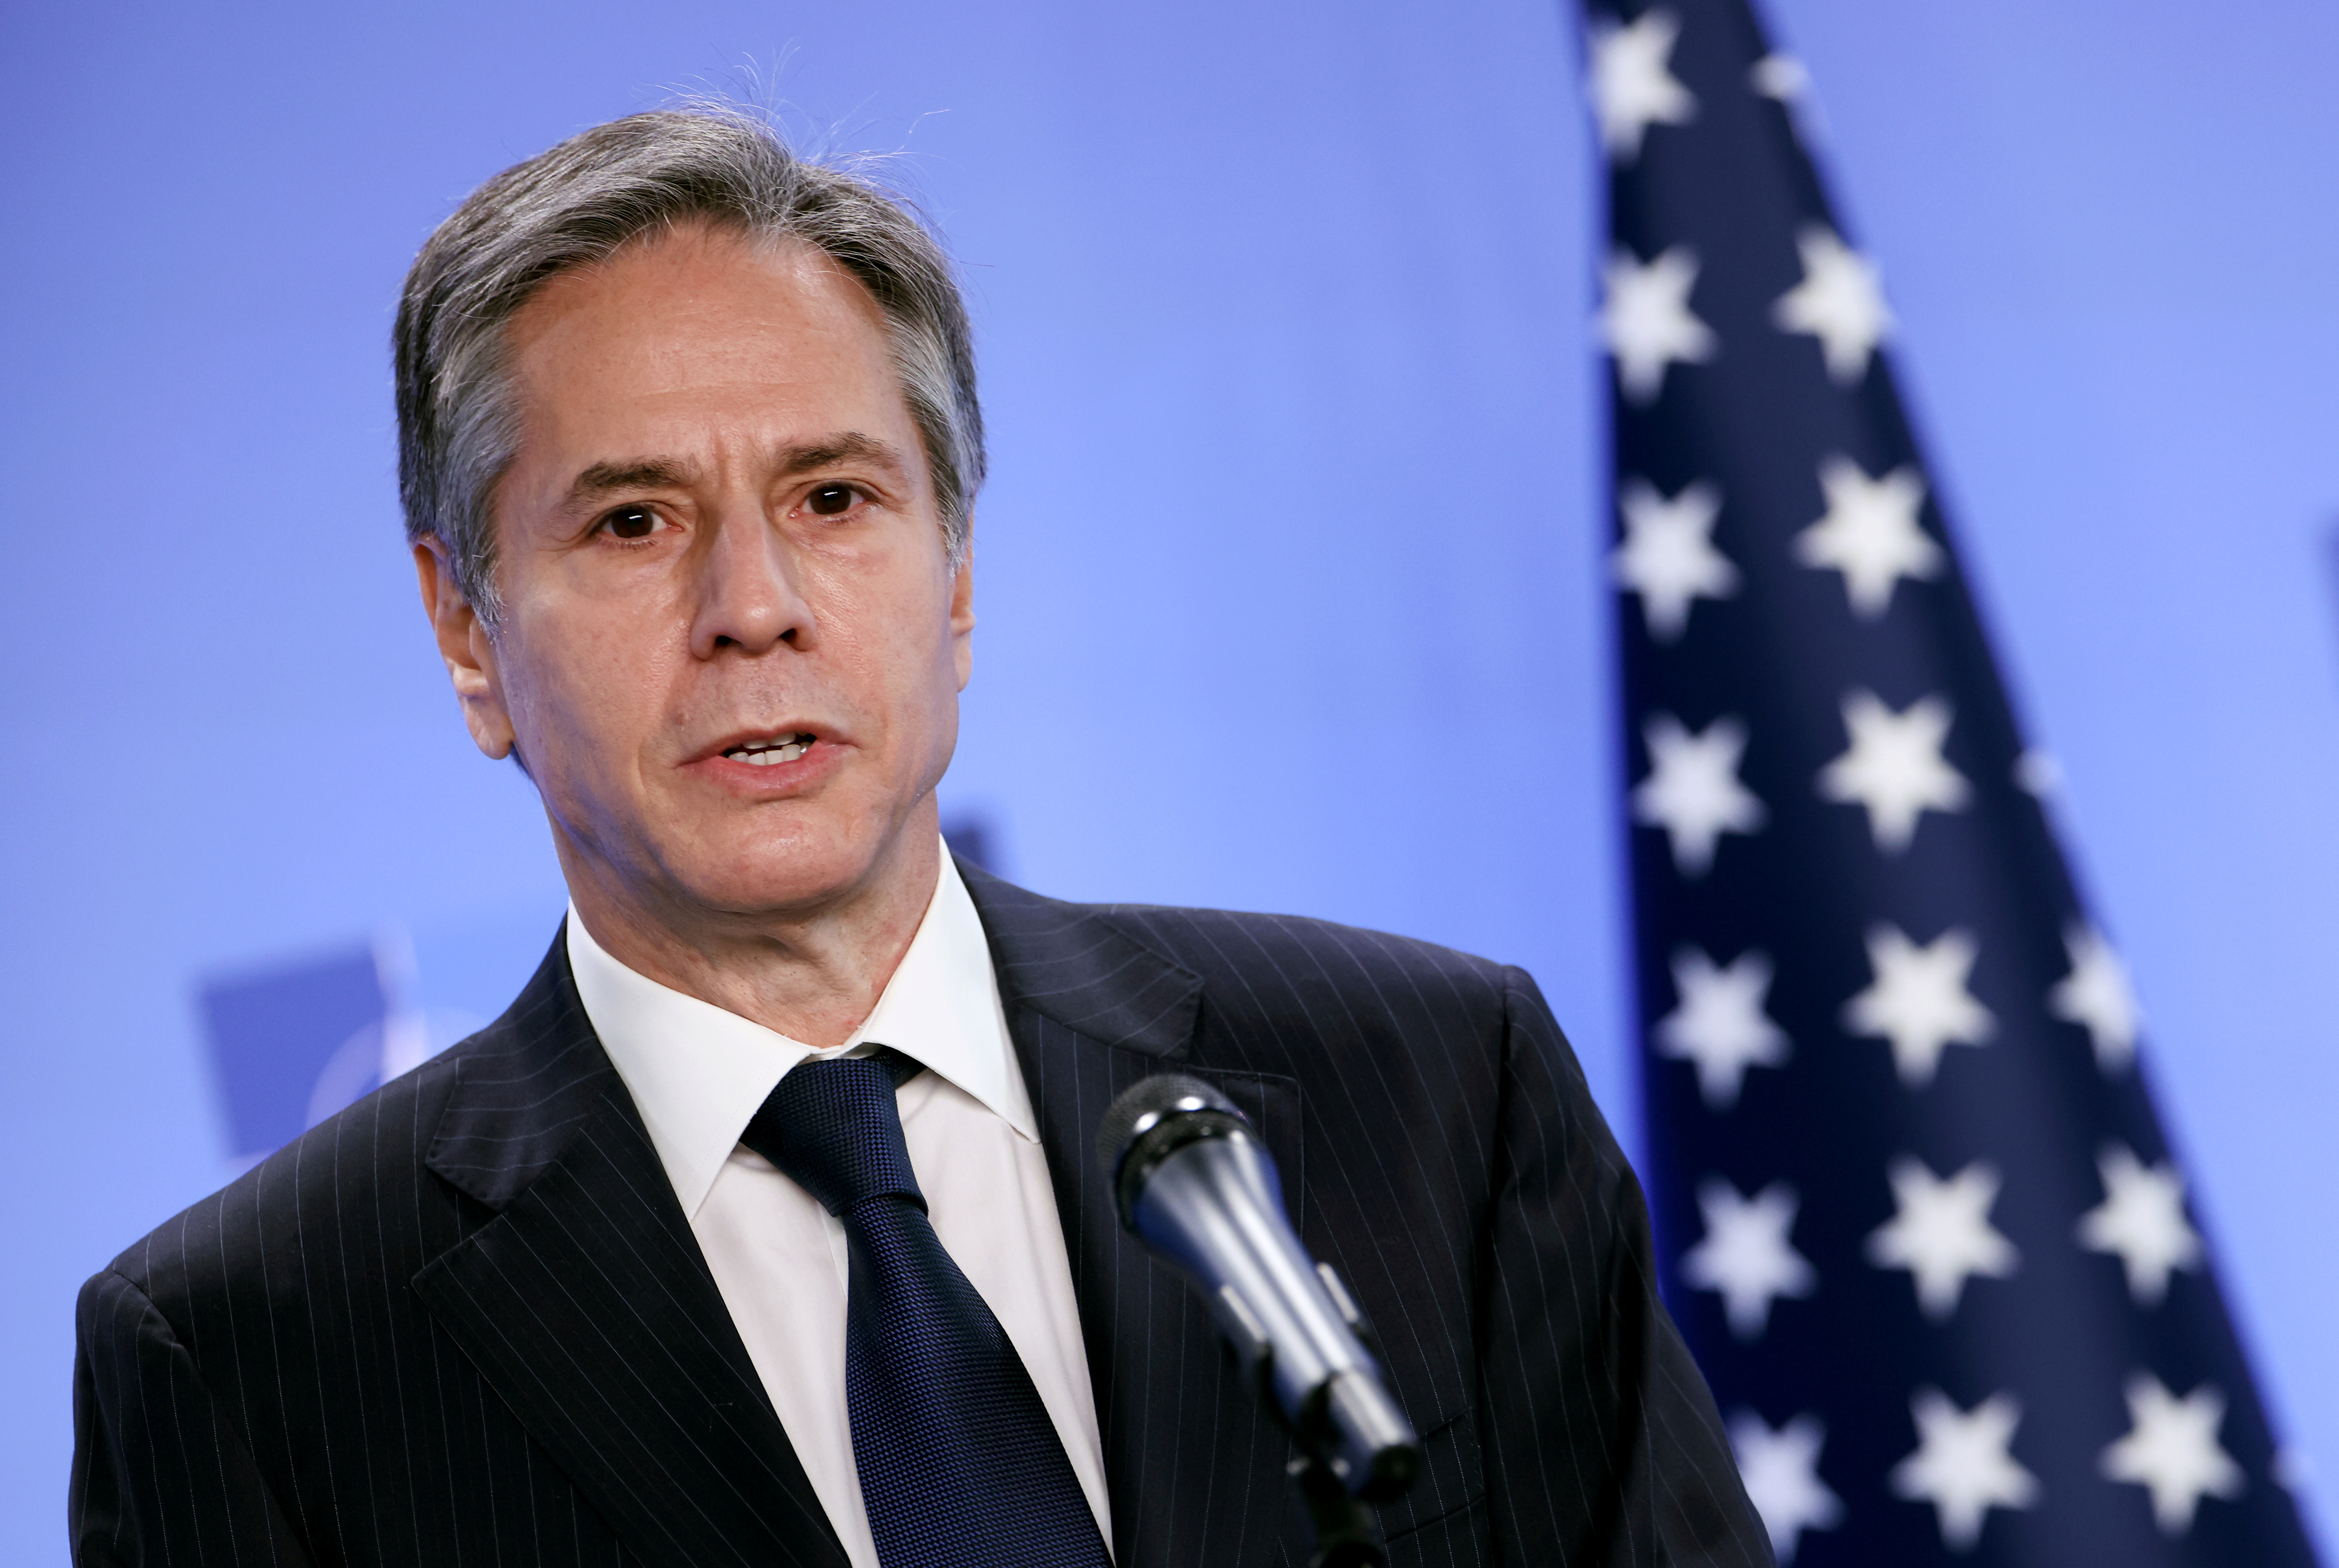 U.S. Secretary of State Antony Blinken visits Brussels to discuss Russia, Afghanistan and Iran